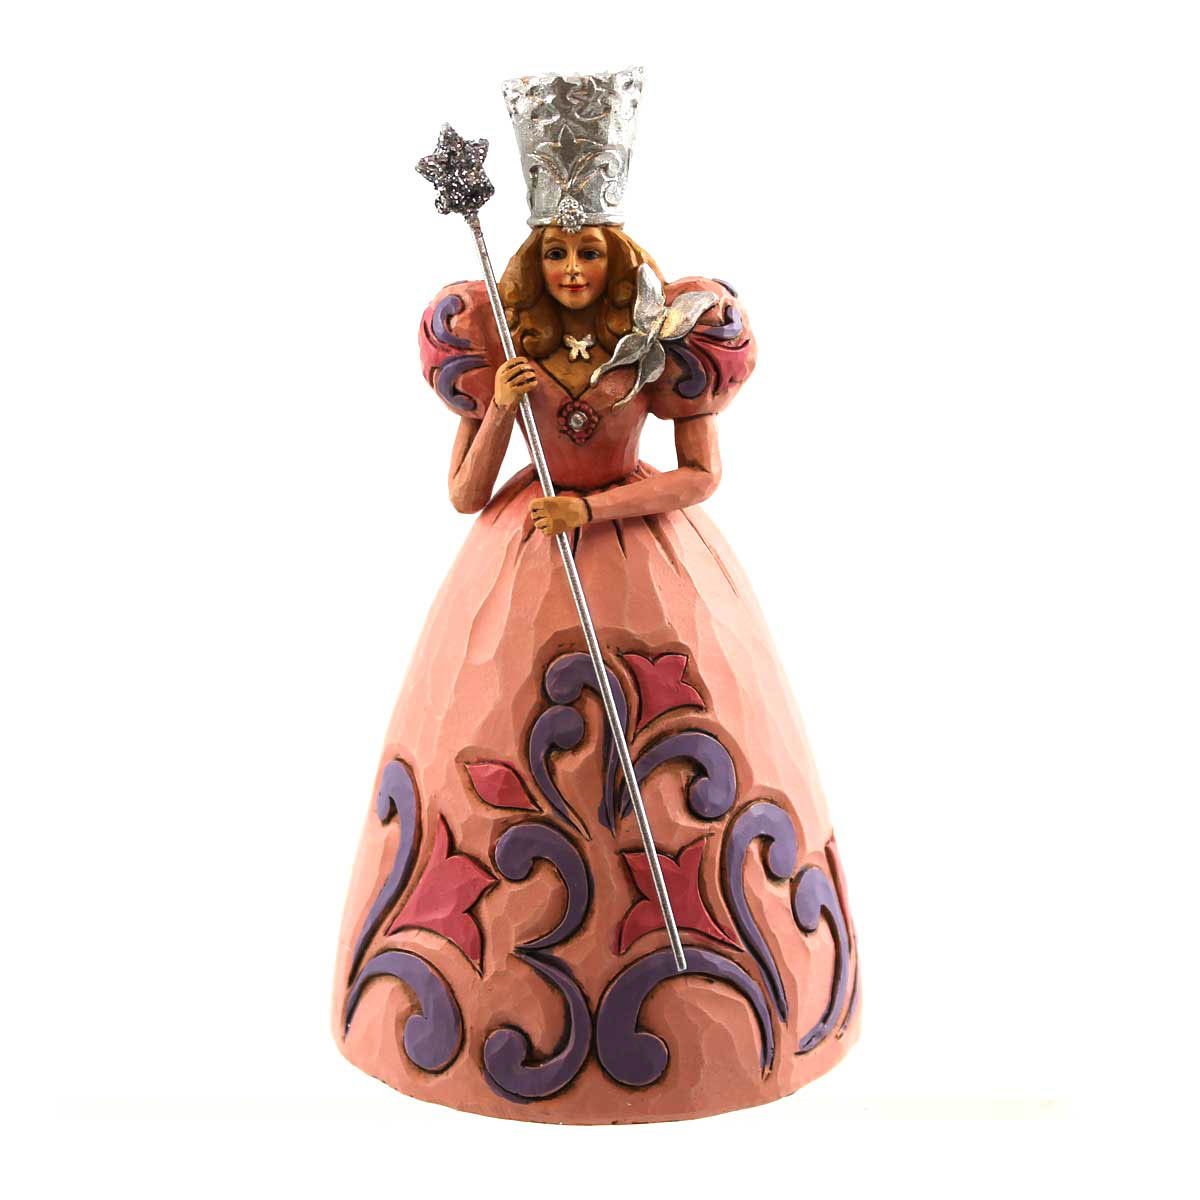 Wizard of Oz Glinda The Good Witch Pint-Sized Figurine by Jim Shore-4044763